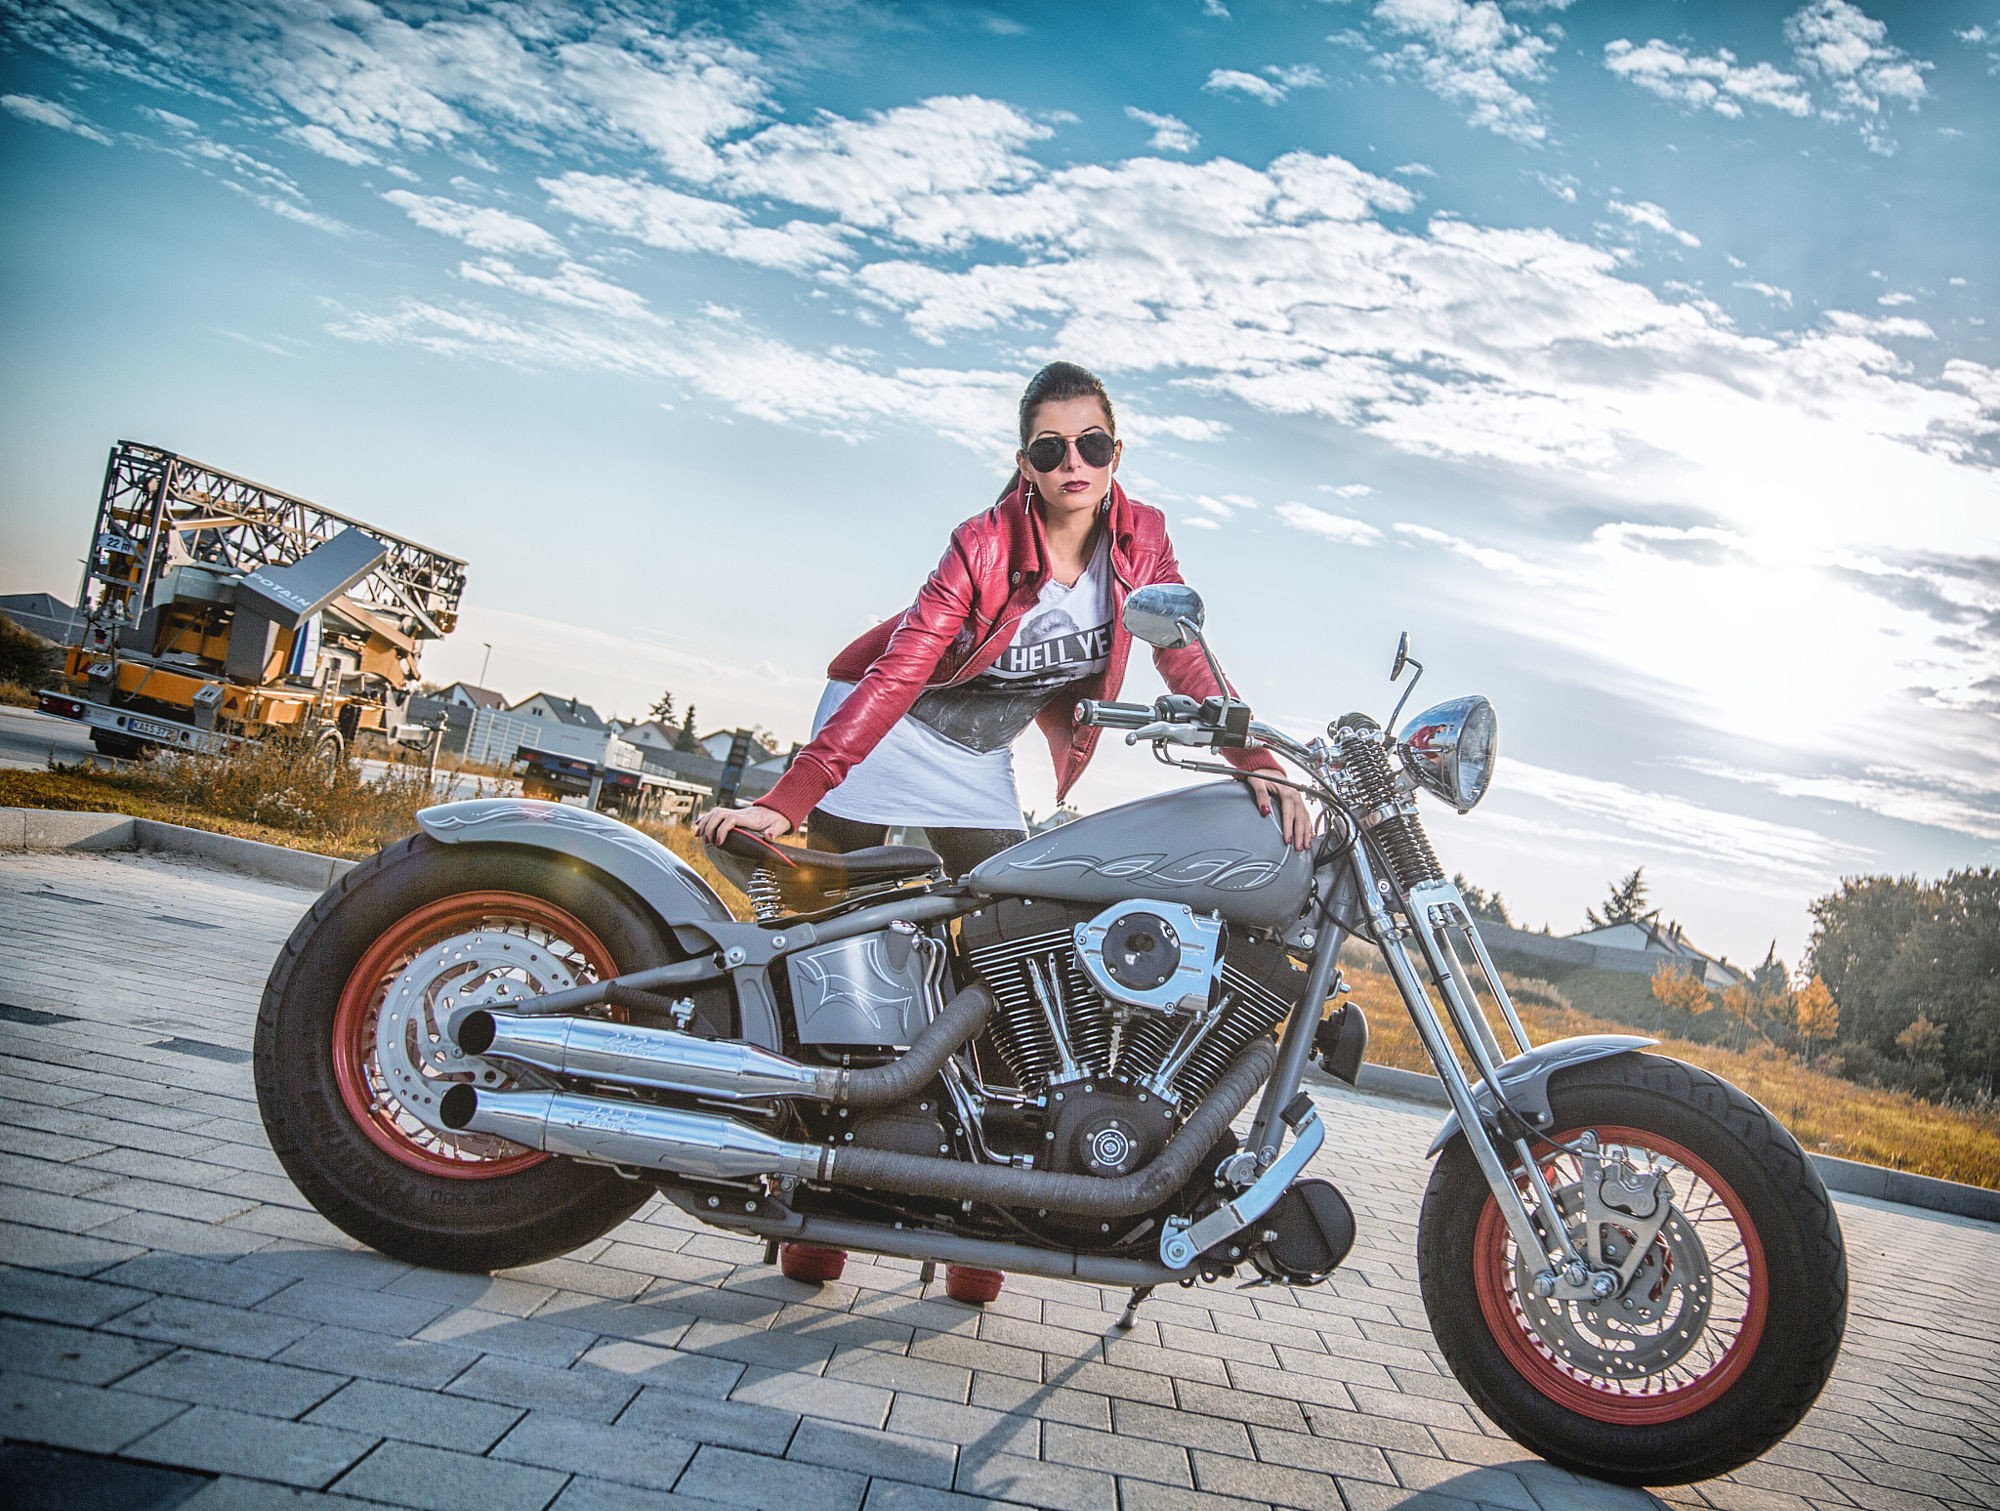 People 2000x1511 women with motorcycles vehicle Harley-Davidson Silver Motorcycles sunglasses women model women with shades leather jacket earring lipstick red nails women outdoors sky